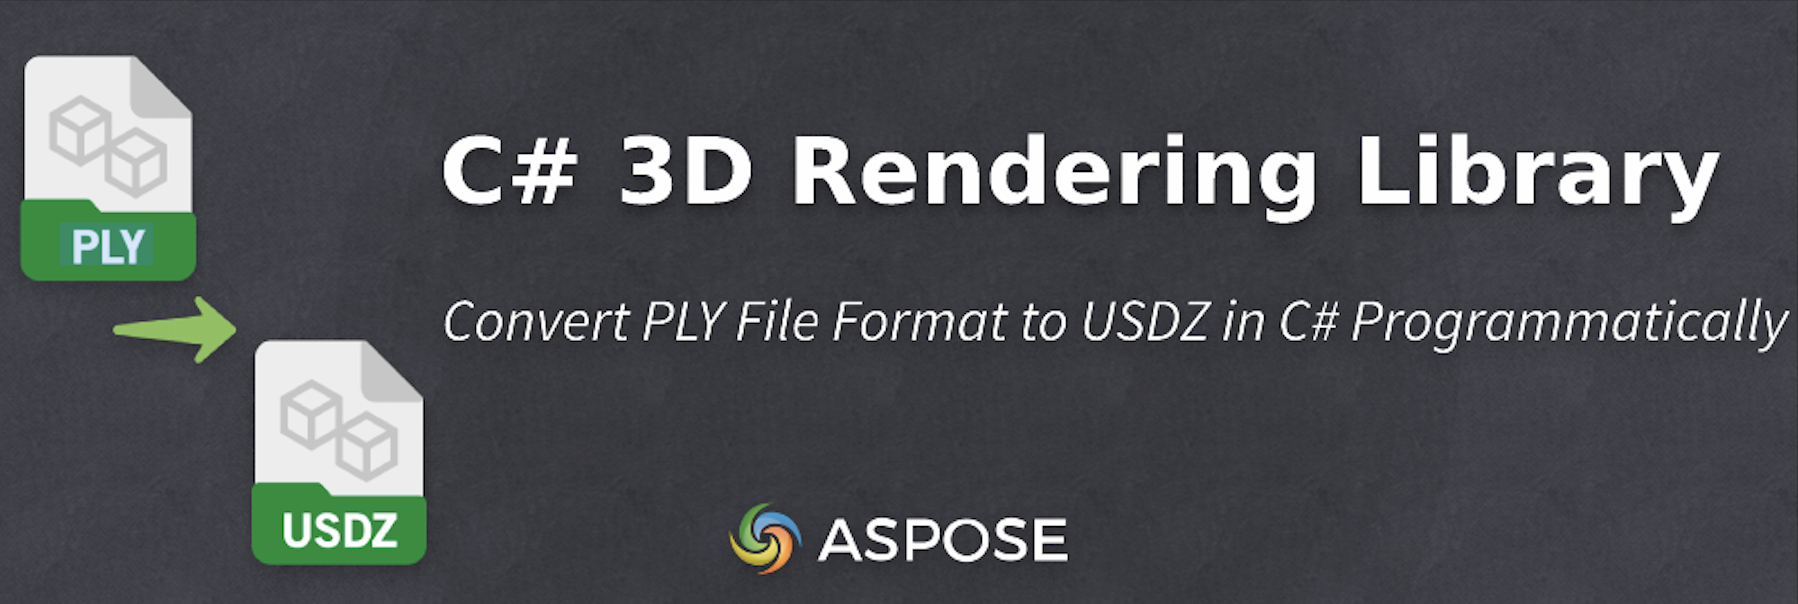 Convert PLY to USDZ in C# - C# 3D Rendering Library